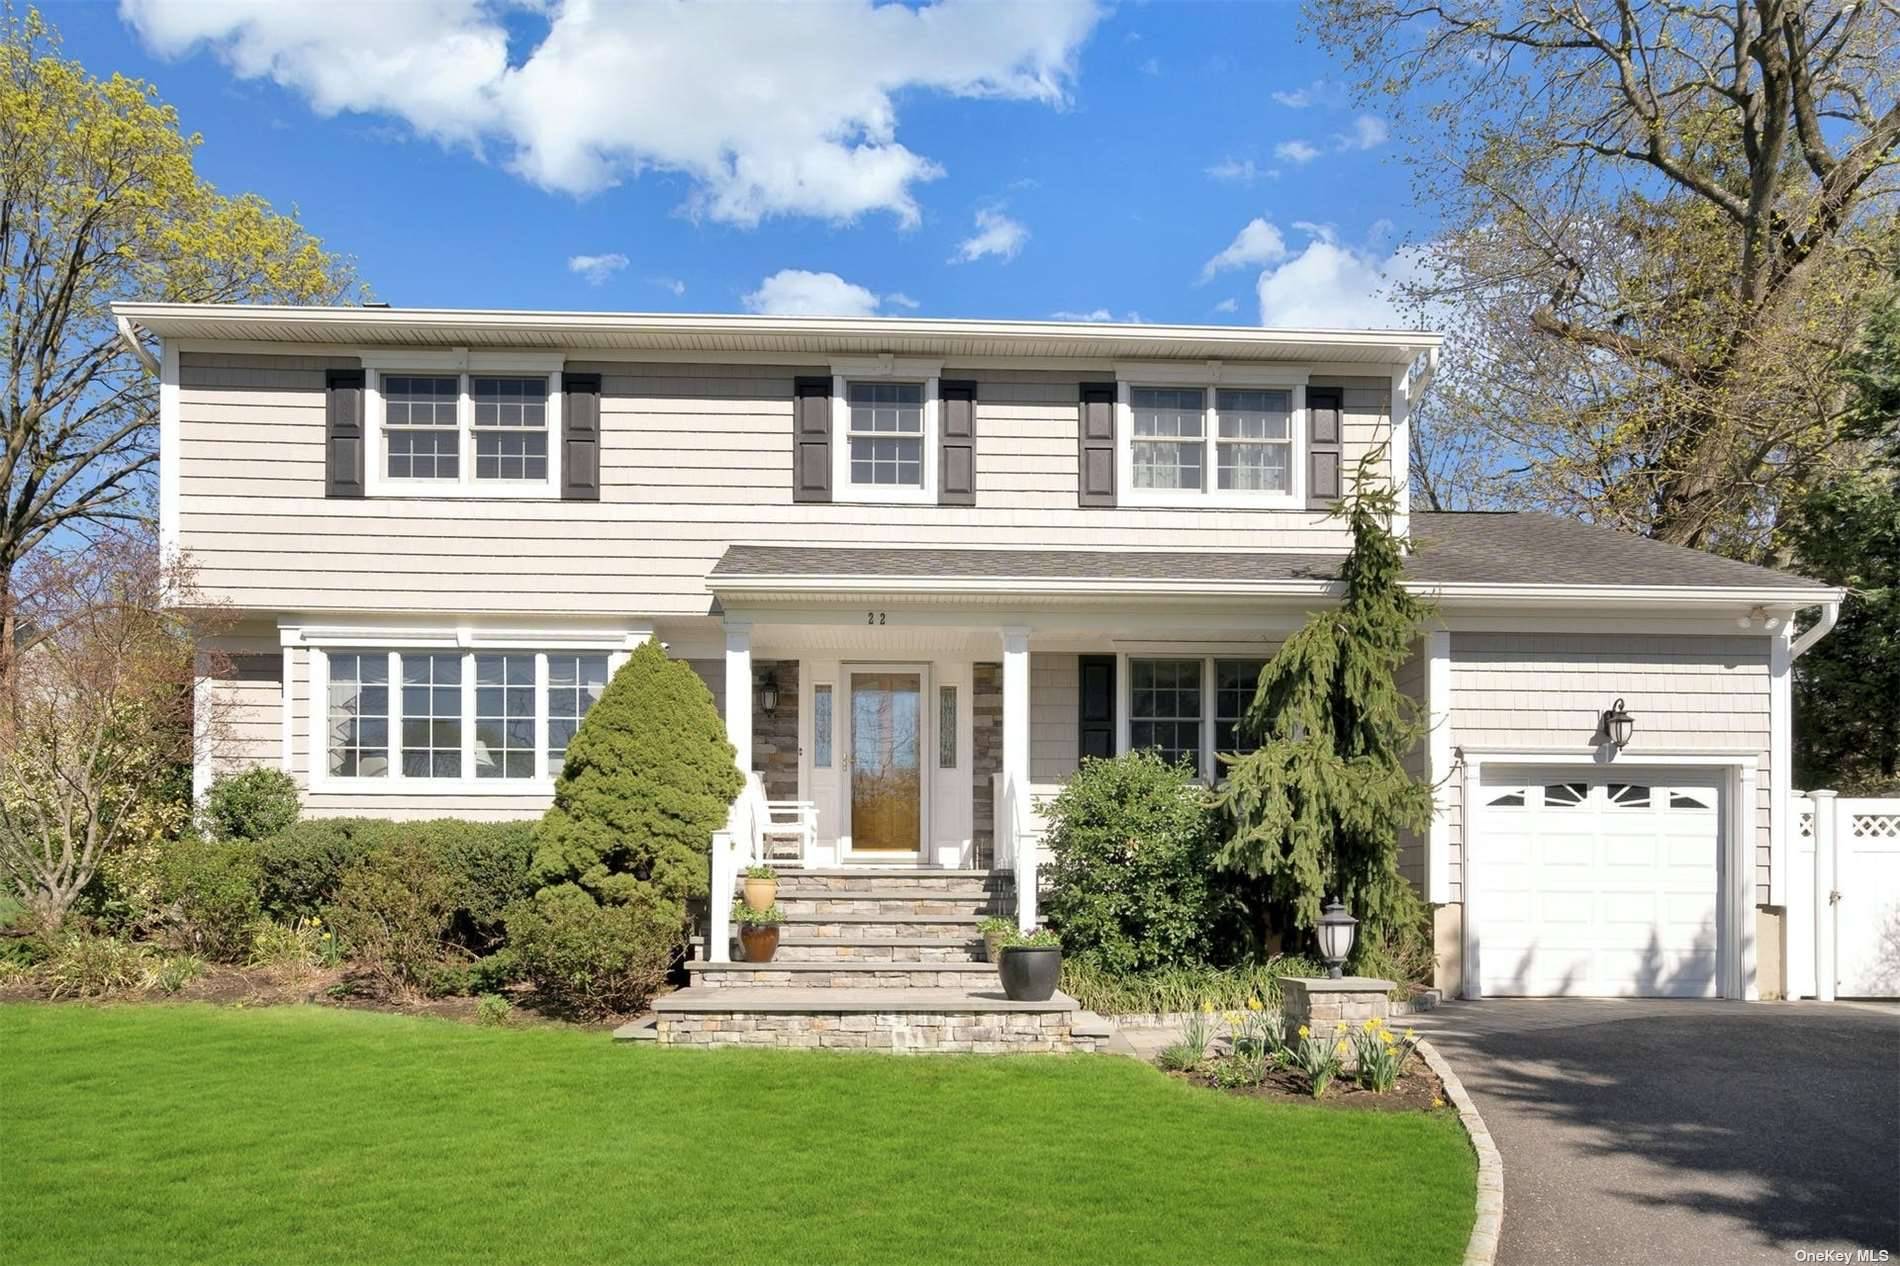 North Syosset Exceptional curb appeal.